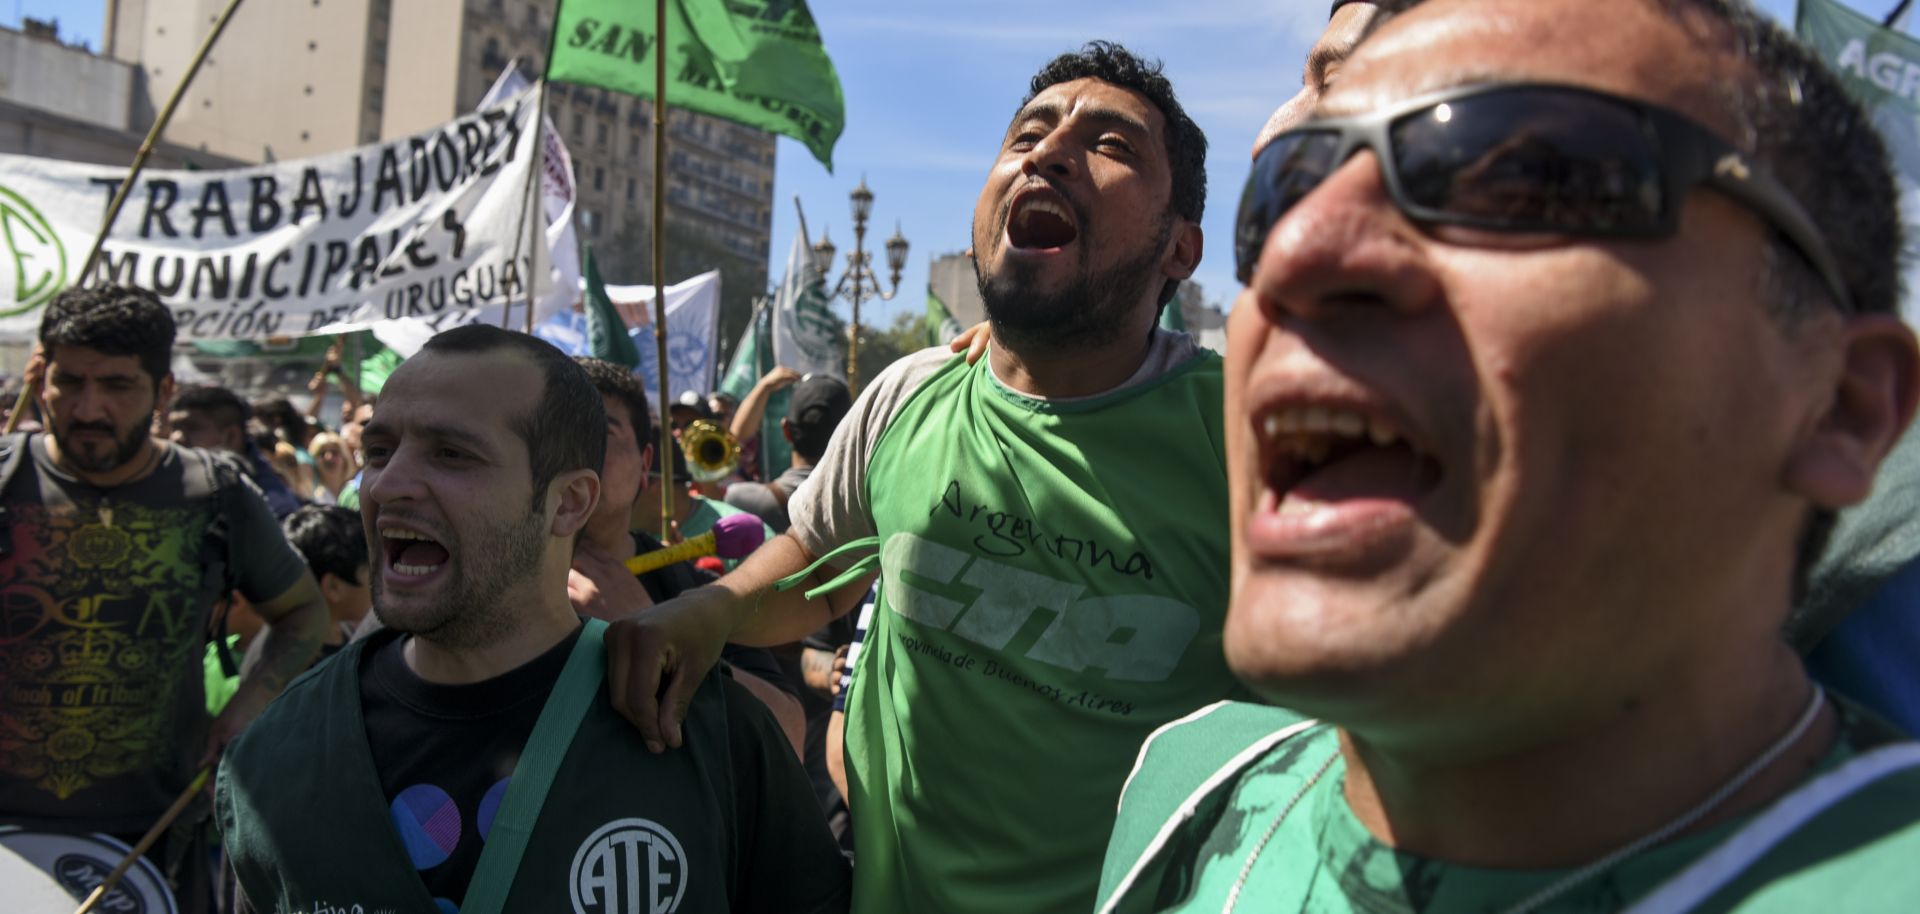 State workers demonstrate outside Argentina's Congress in Buenos Aires in September 2016 during a national strike to demand the reopening of wage negotiations to compensate for high inflation.